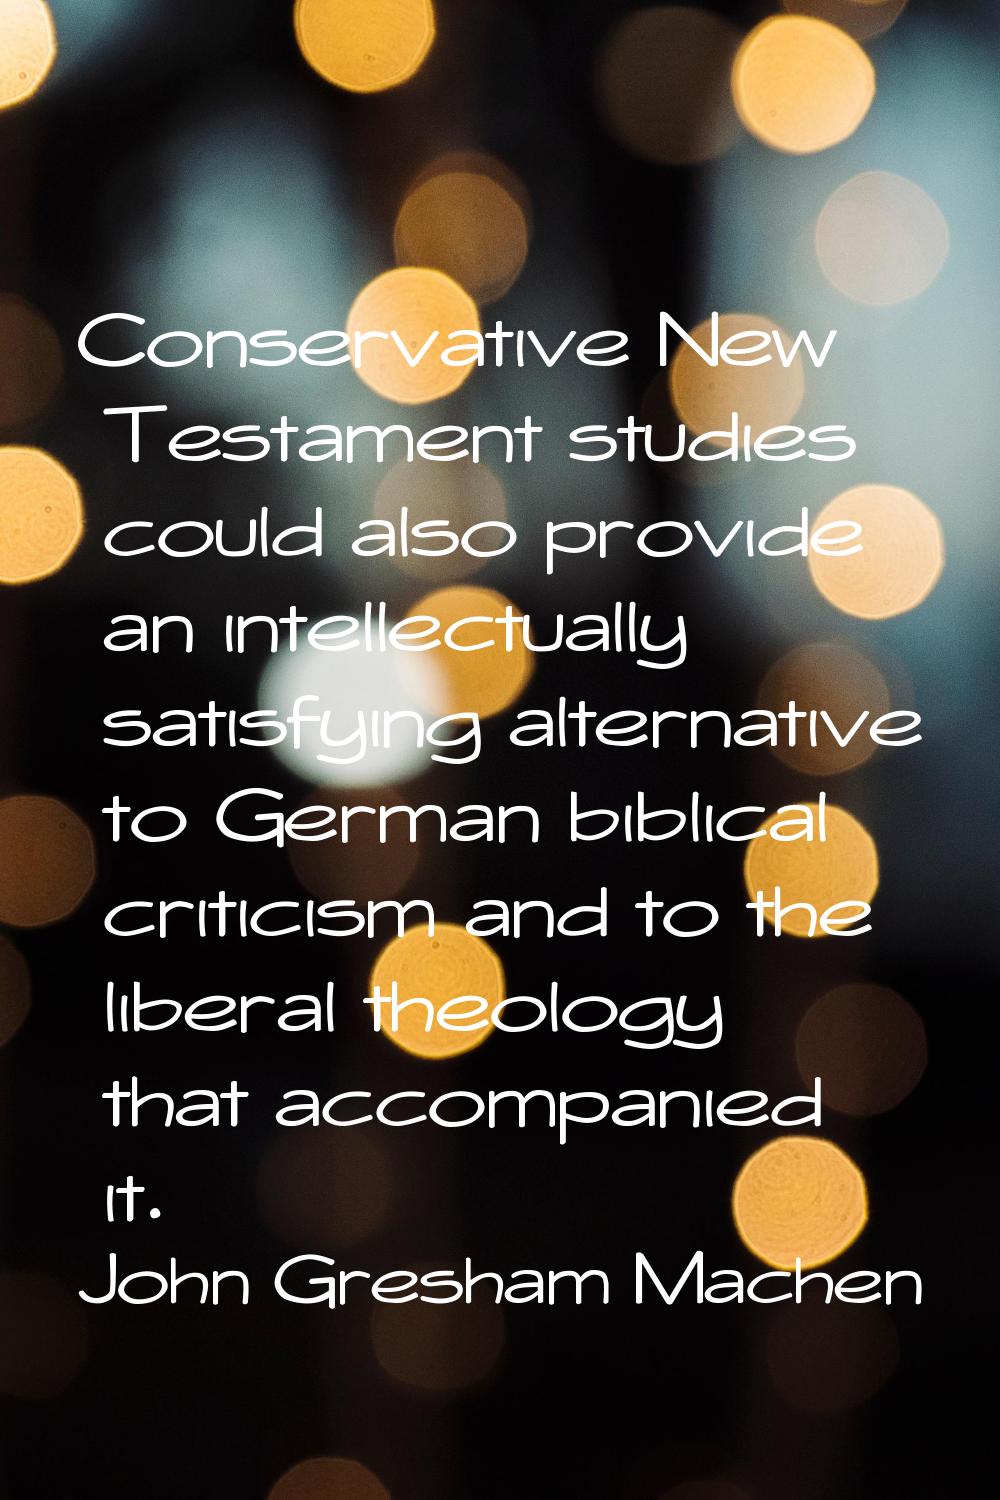 Conservative New Testament studies could also provide an intellectually satisfying alternative to G